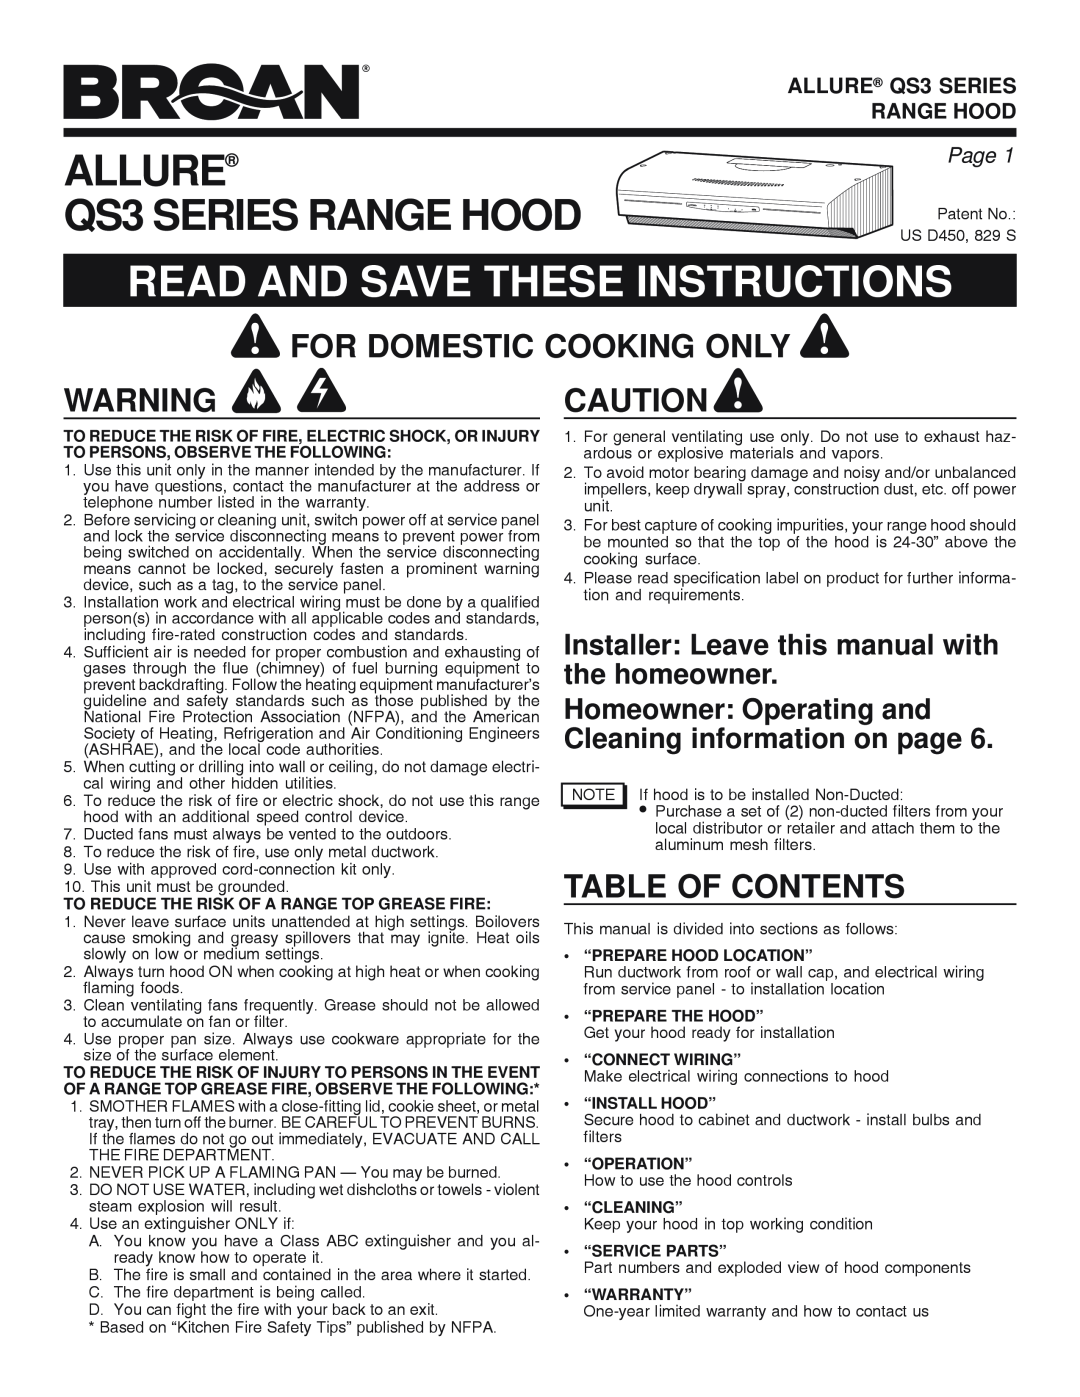 Broan manual Read And Save These Instructions, For Domestic Cooking Only, Table Of Contents, ALLURE QS3 SERIES, Page 